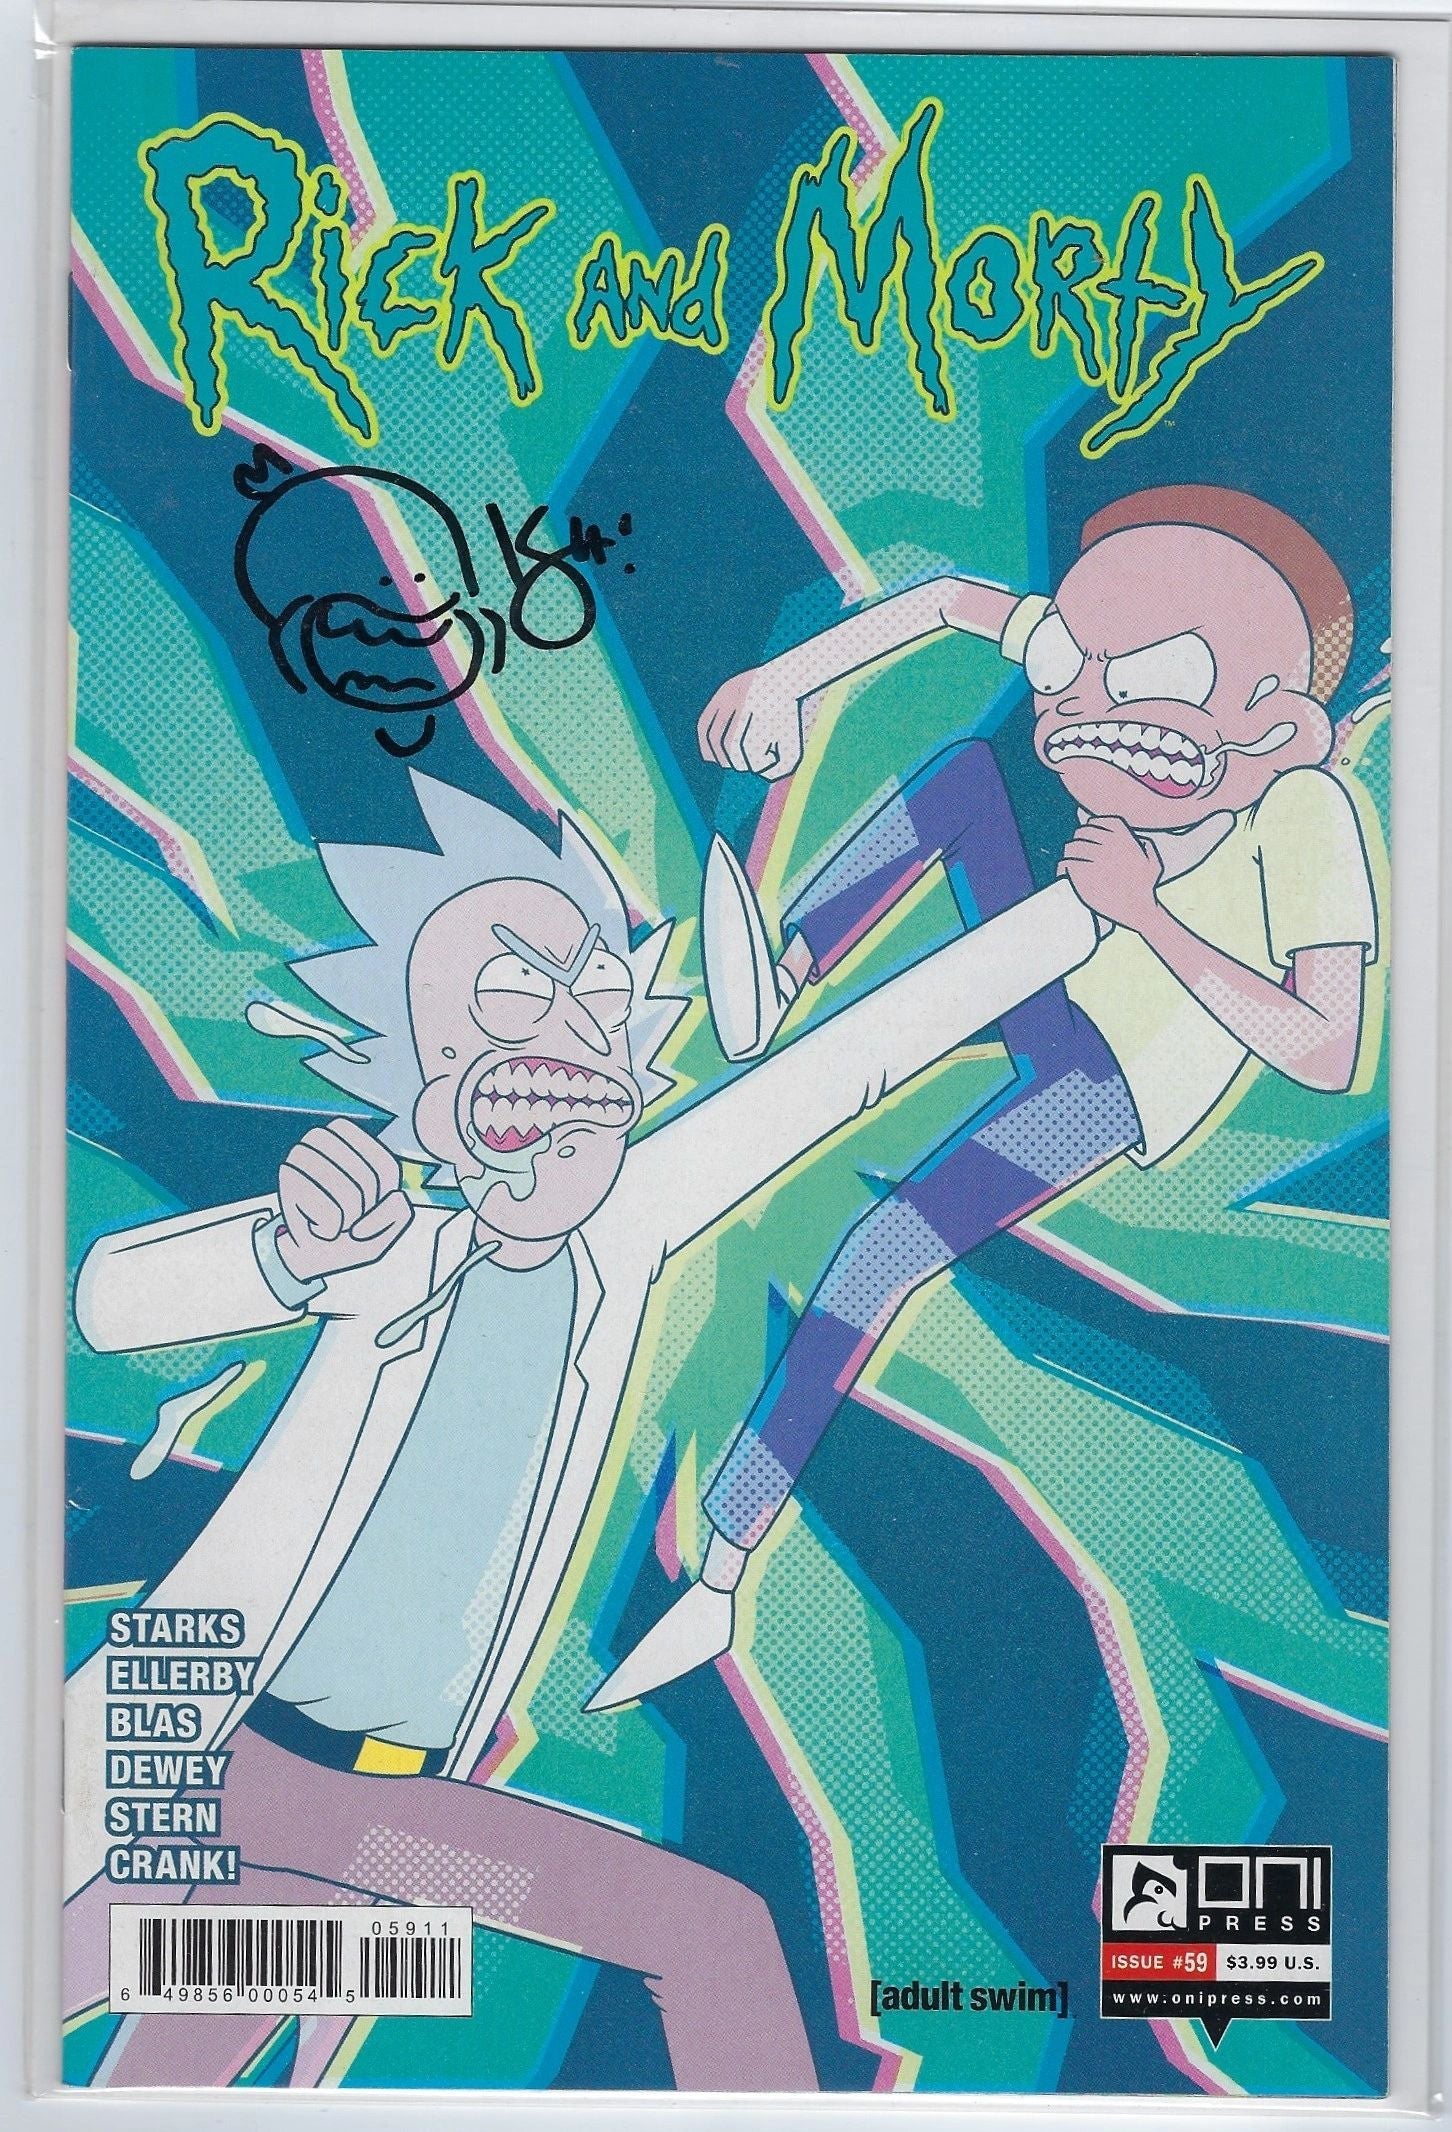 Kyle Starks Signed Rick & Morty Issue #59 With Re-Mark BECKETT COA